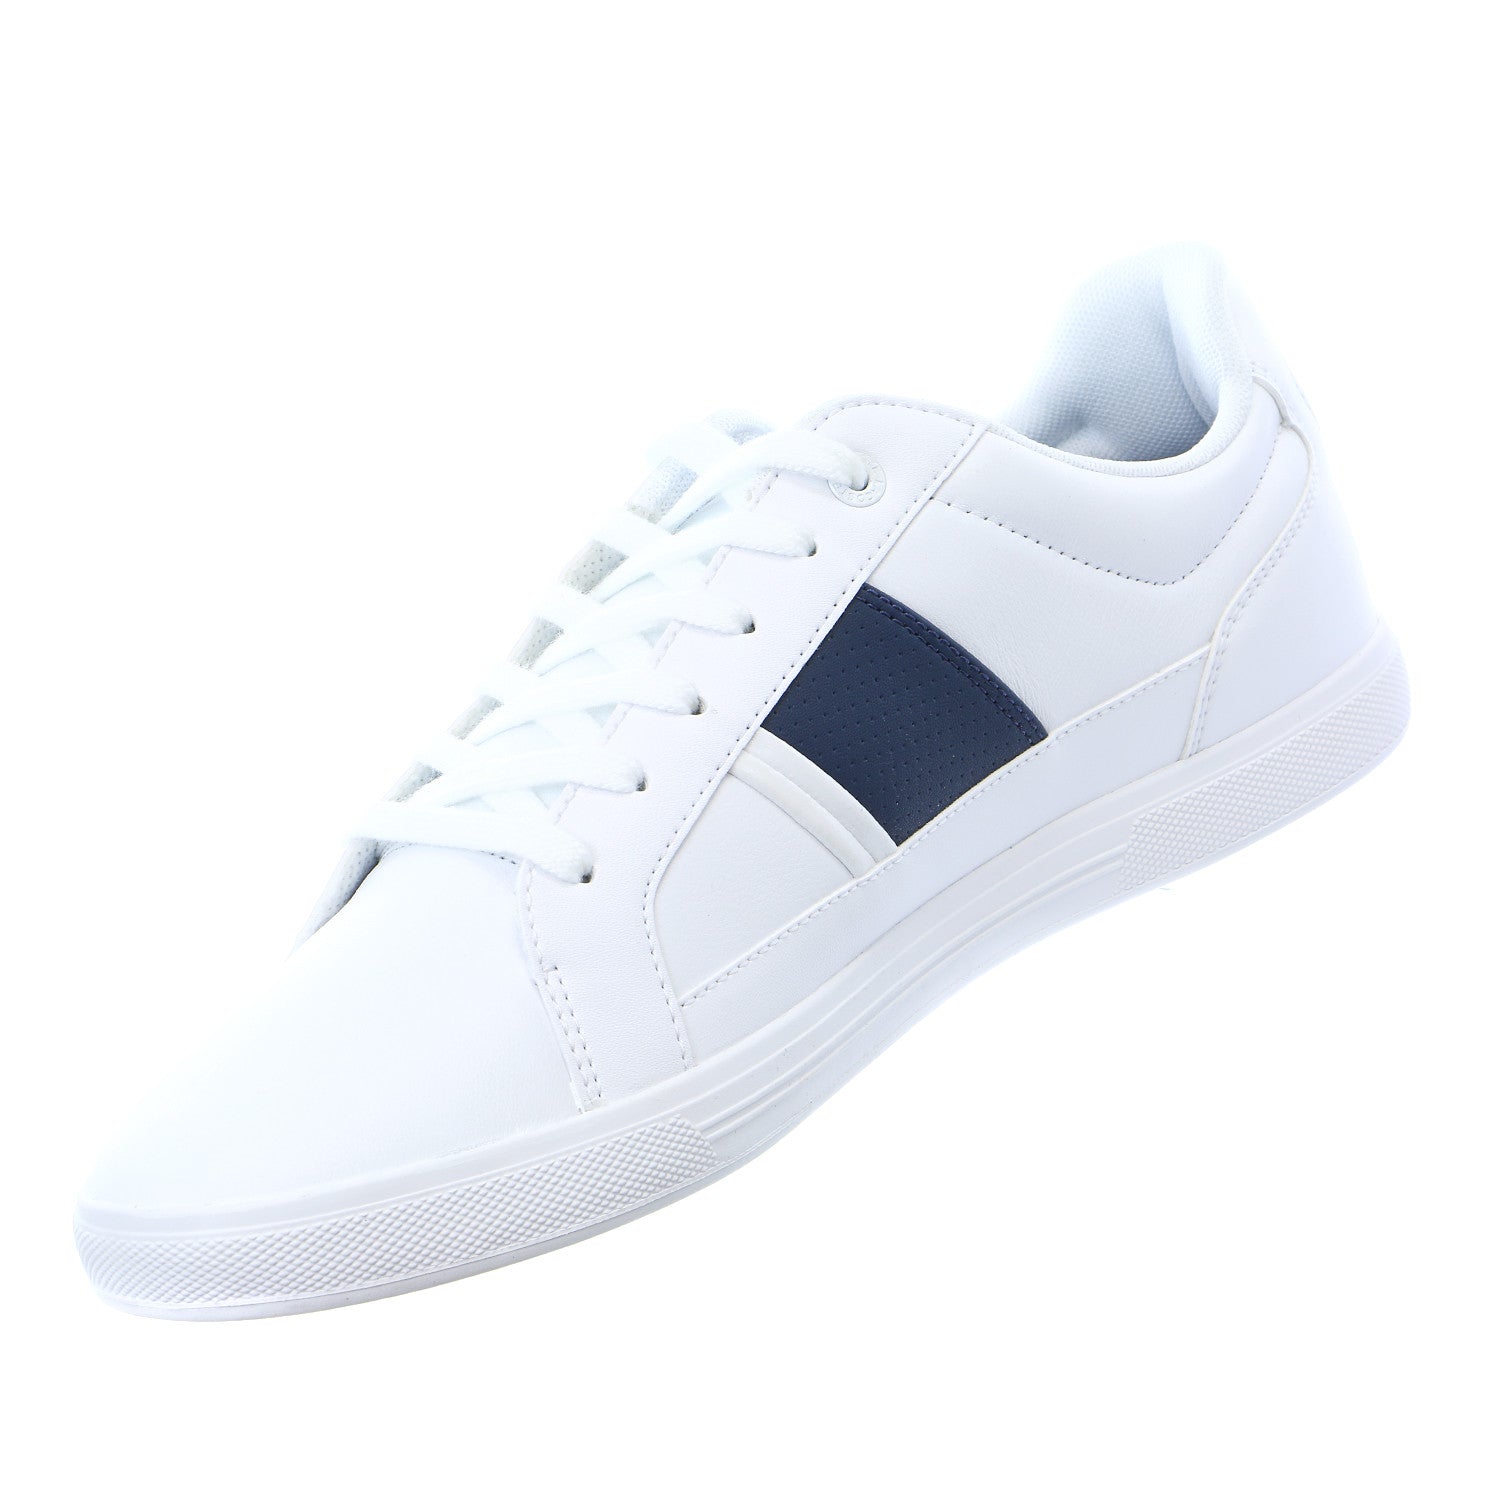 Lacoste White Sneakers Size 12 | White sneakers, Lacoste, Athleisure casual